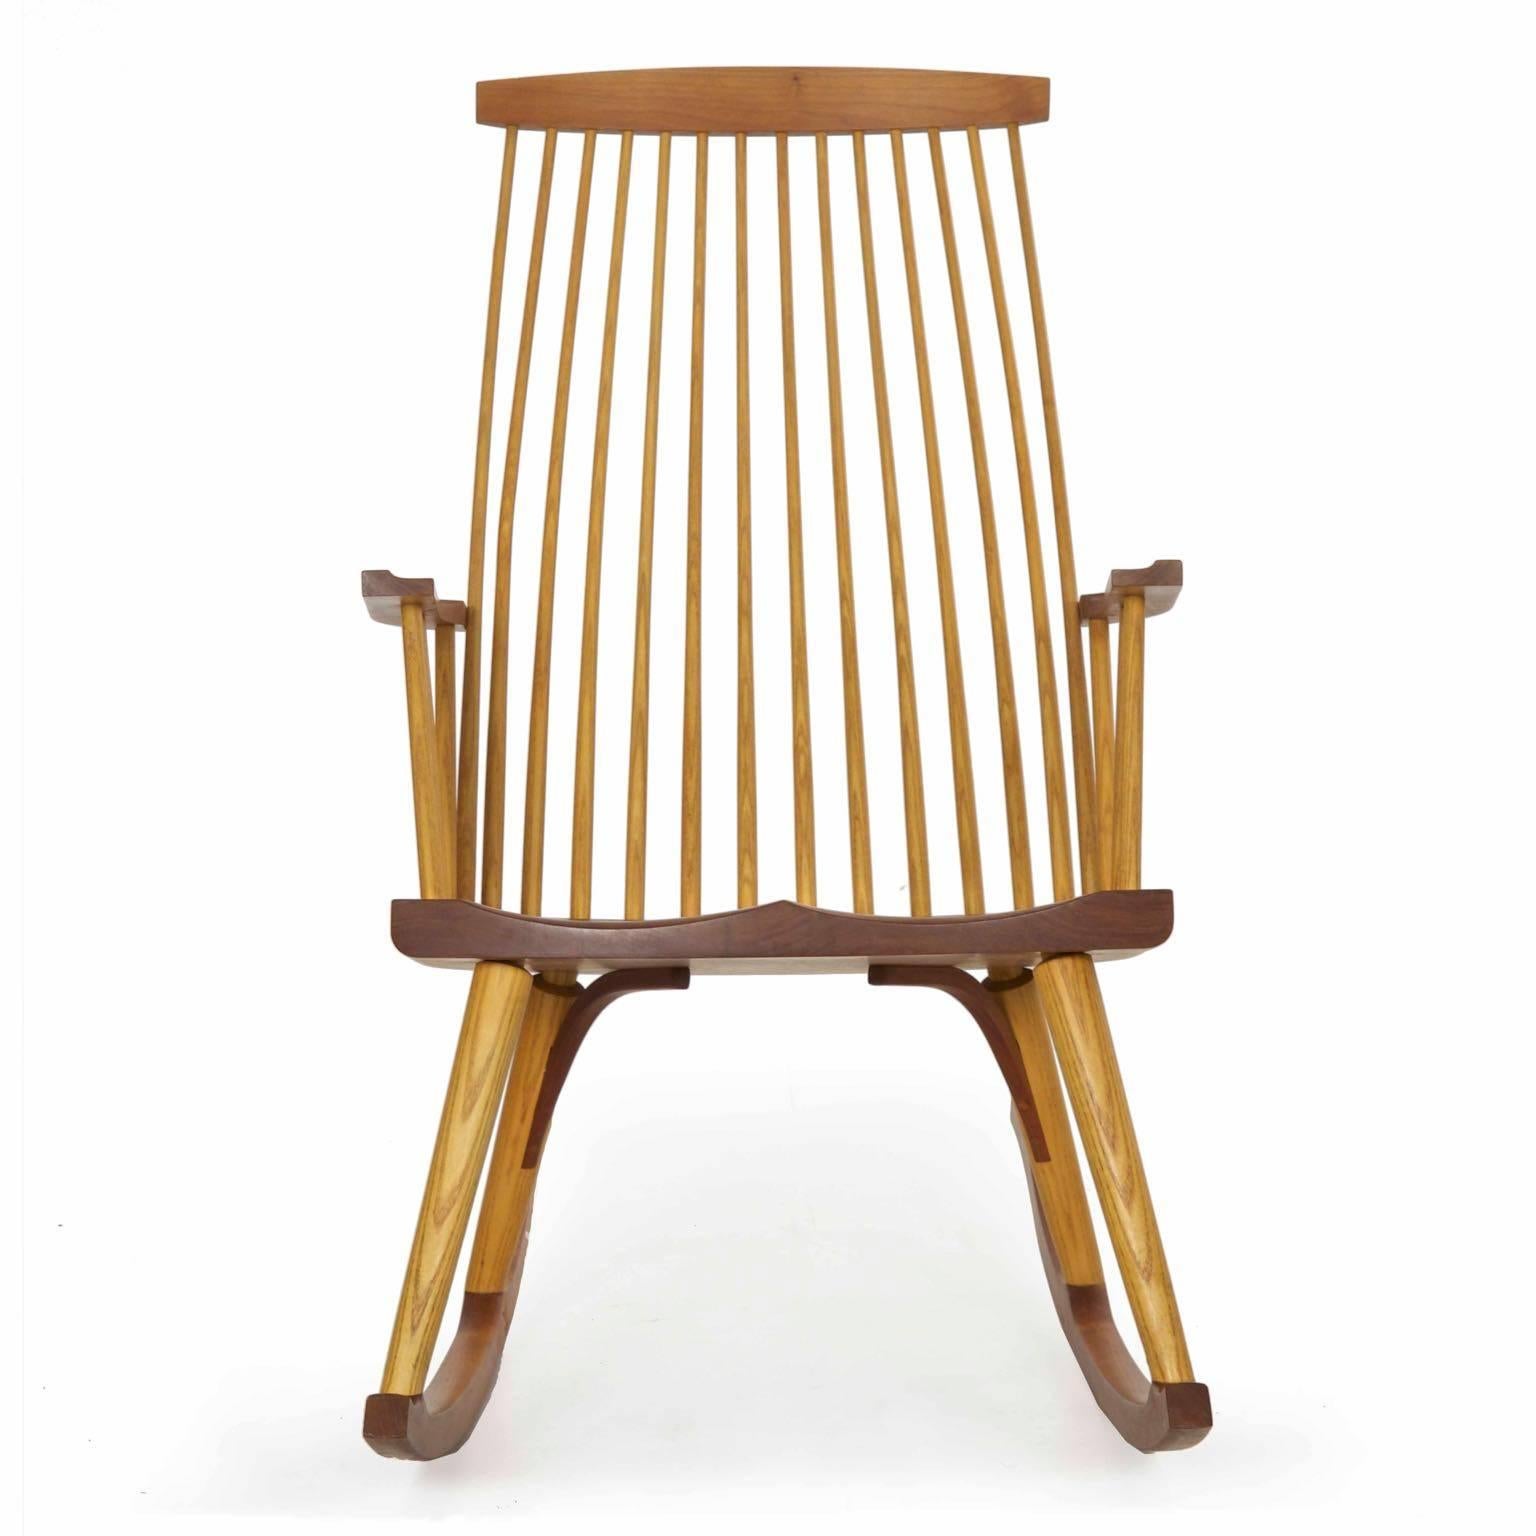 A very finely benchmade modern rocking chair by the firm of Thomas Moser, it was designed in 1984 and named after the Maine town that was home to their first workshop. A rich and striking piece crafted of solid cherry and ash. It is a fresh and